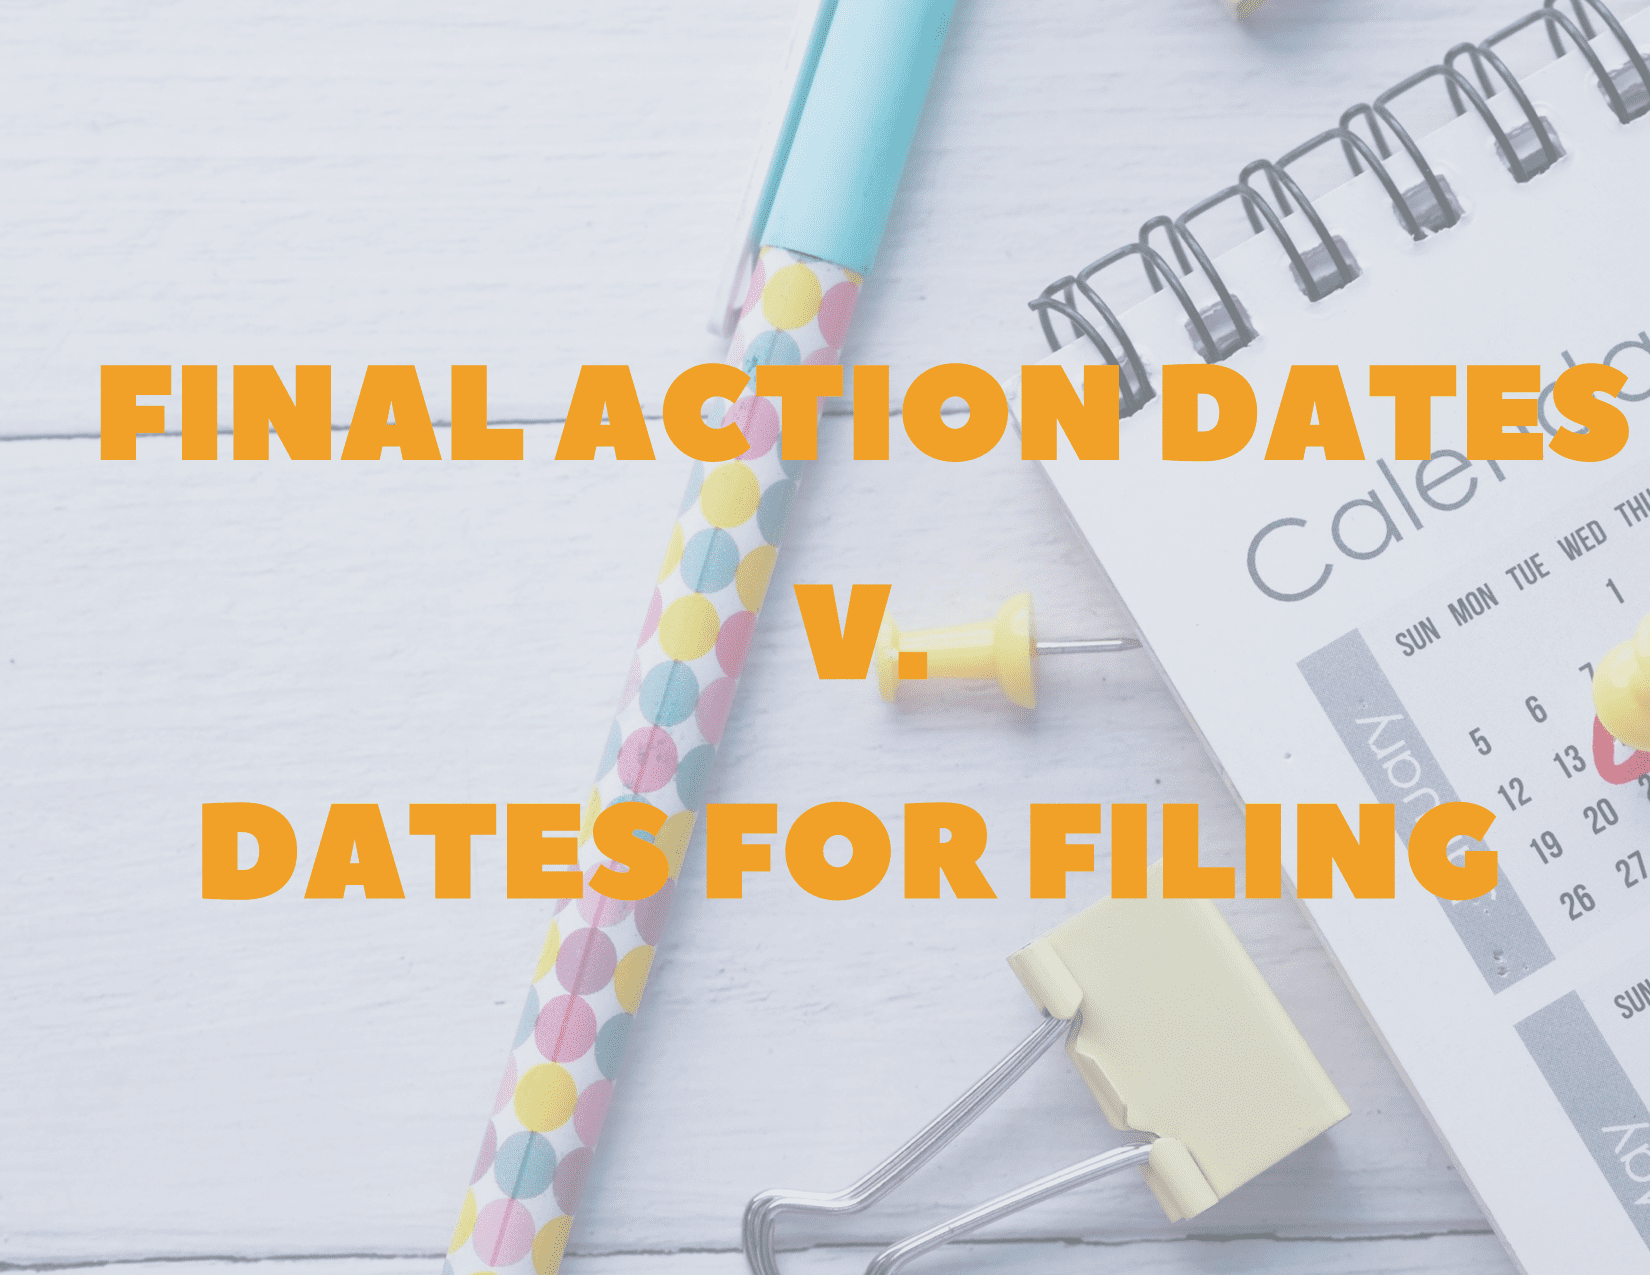 Difference Between Final Action Dates and Dates for Filing